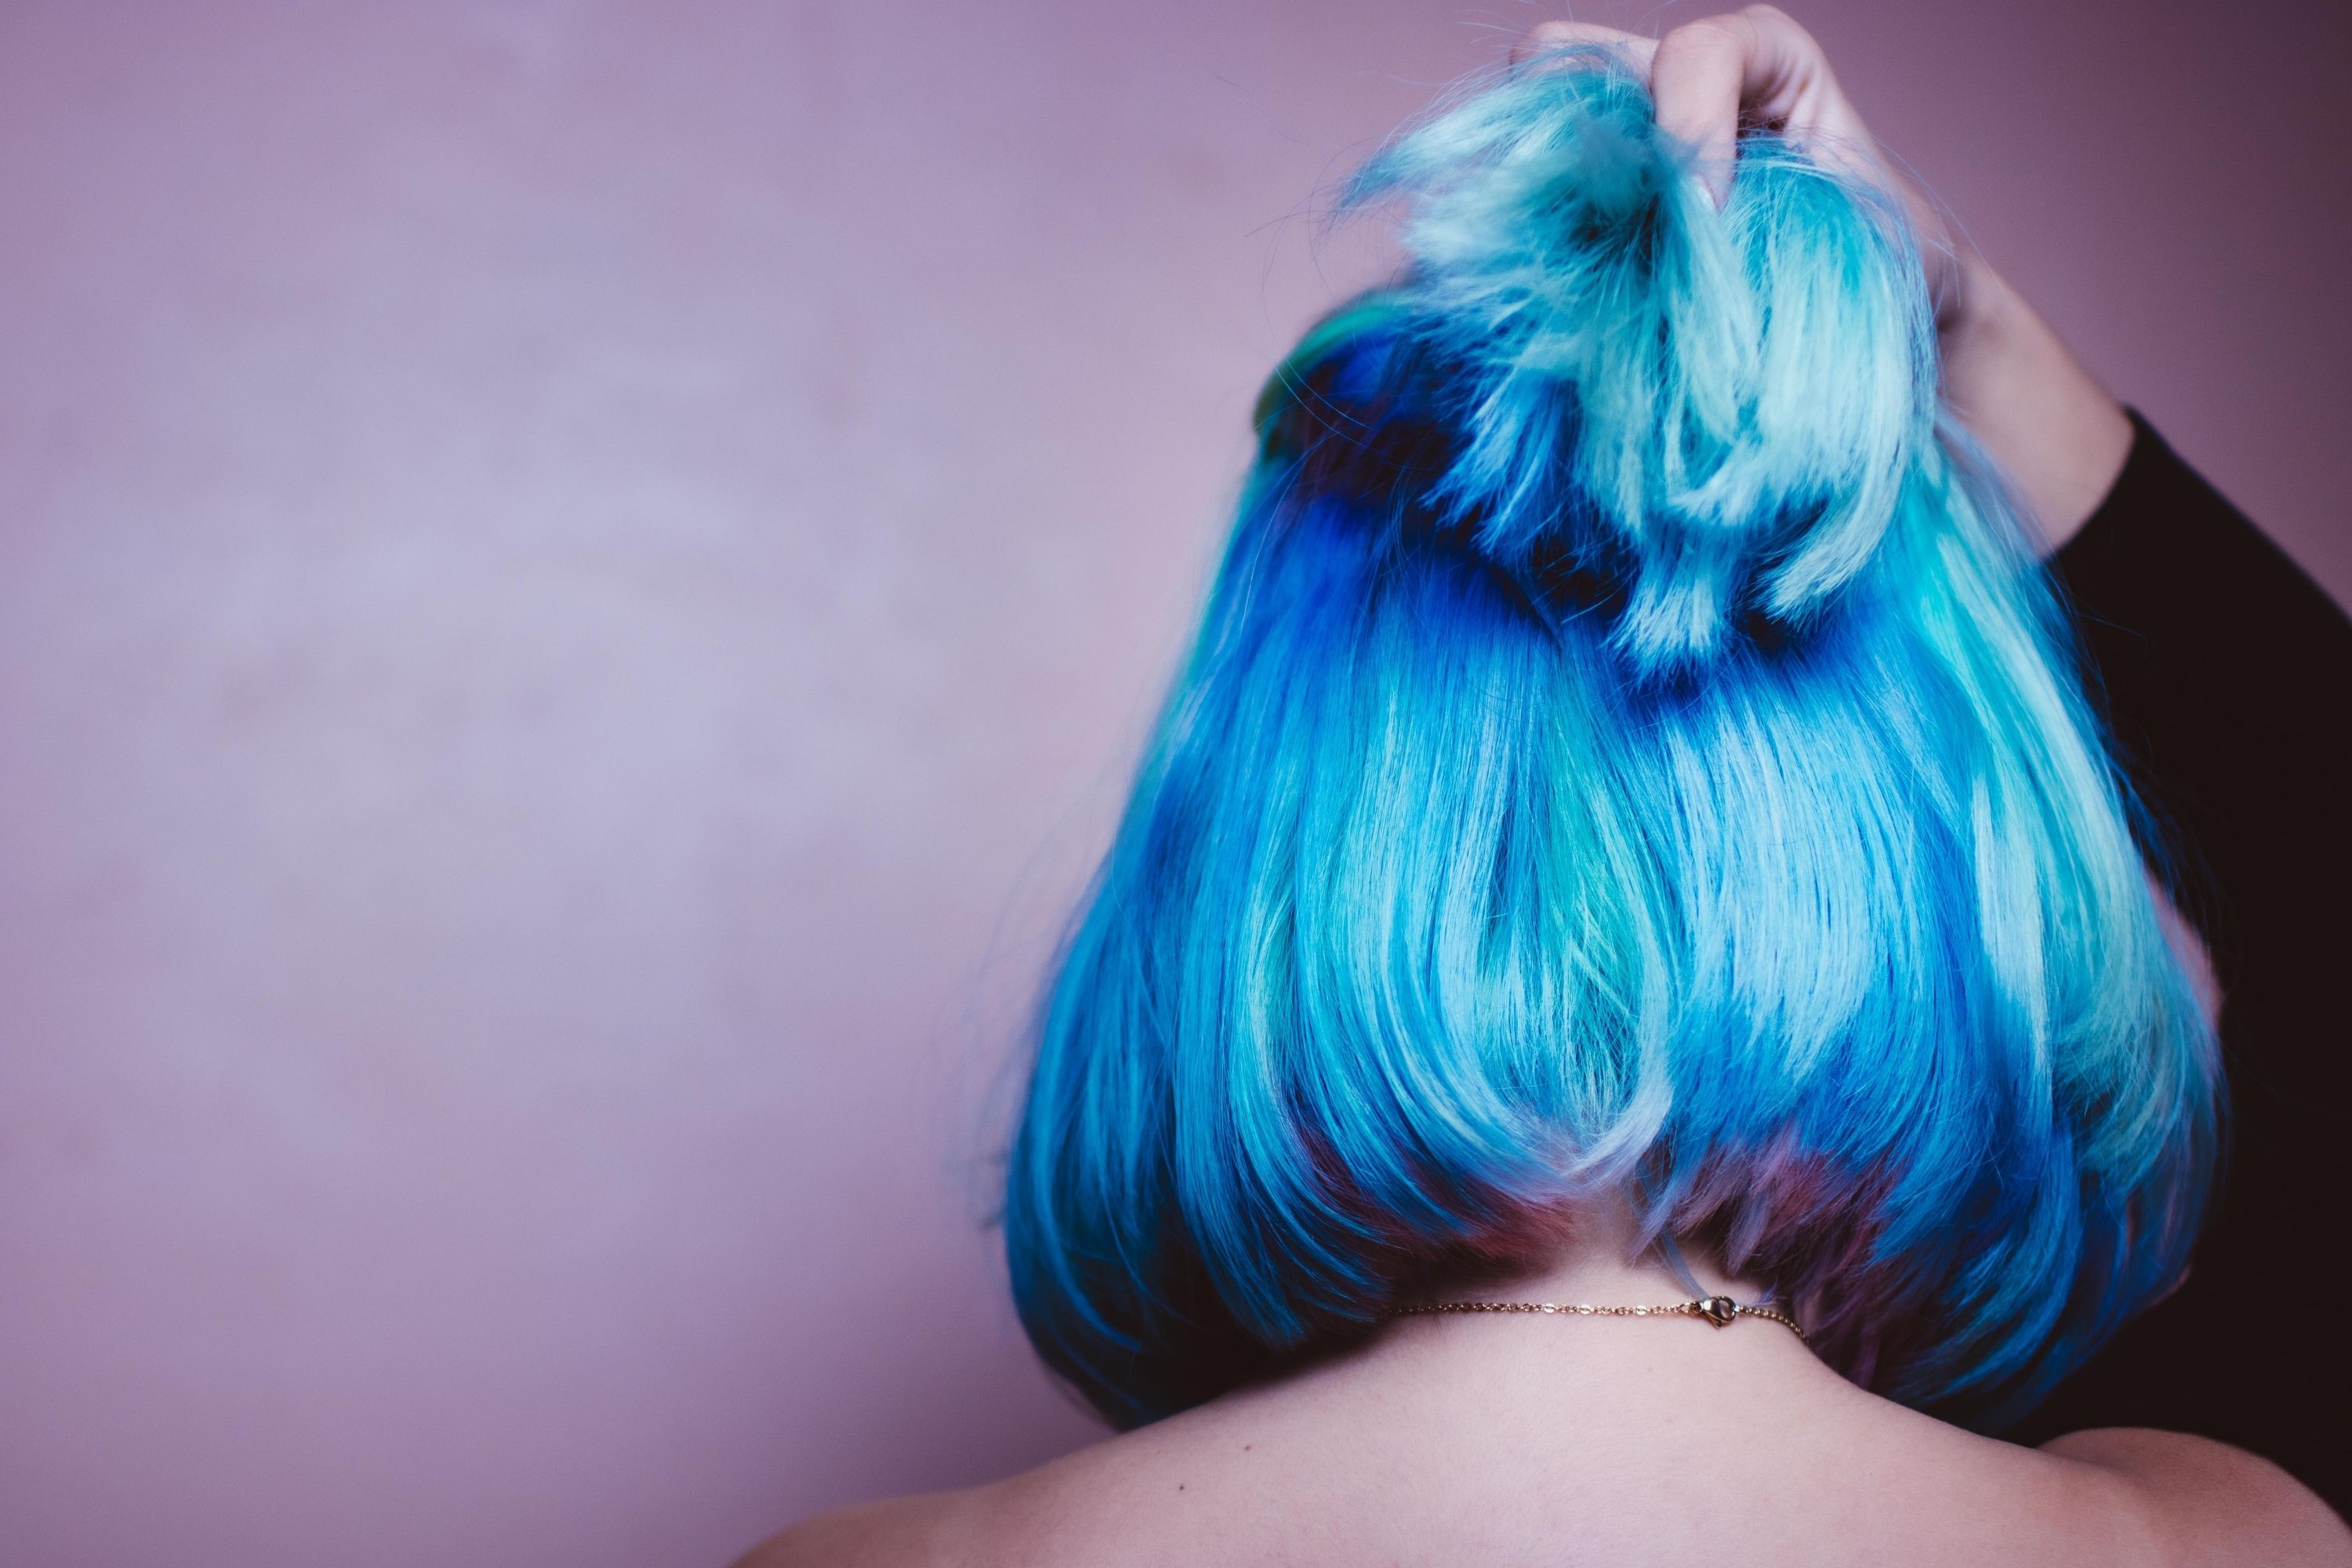 What Happens When You Bleach Blue Hair? - Beezzly